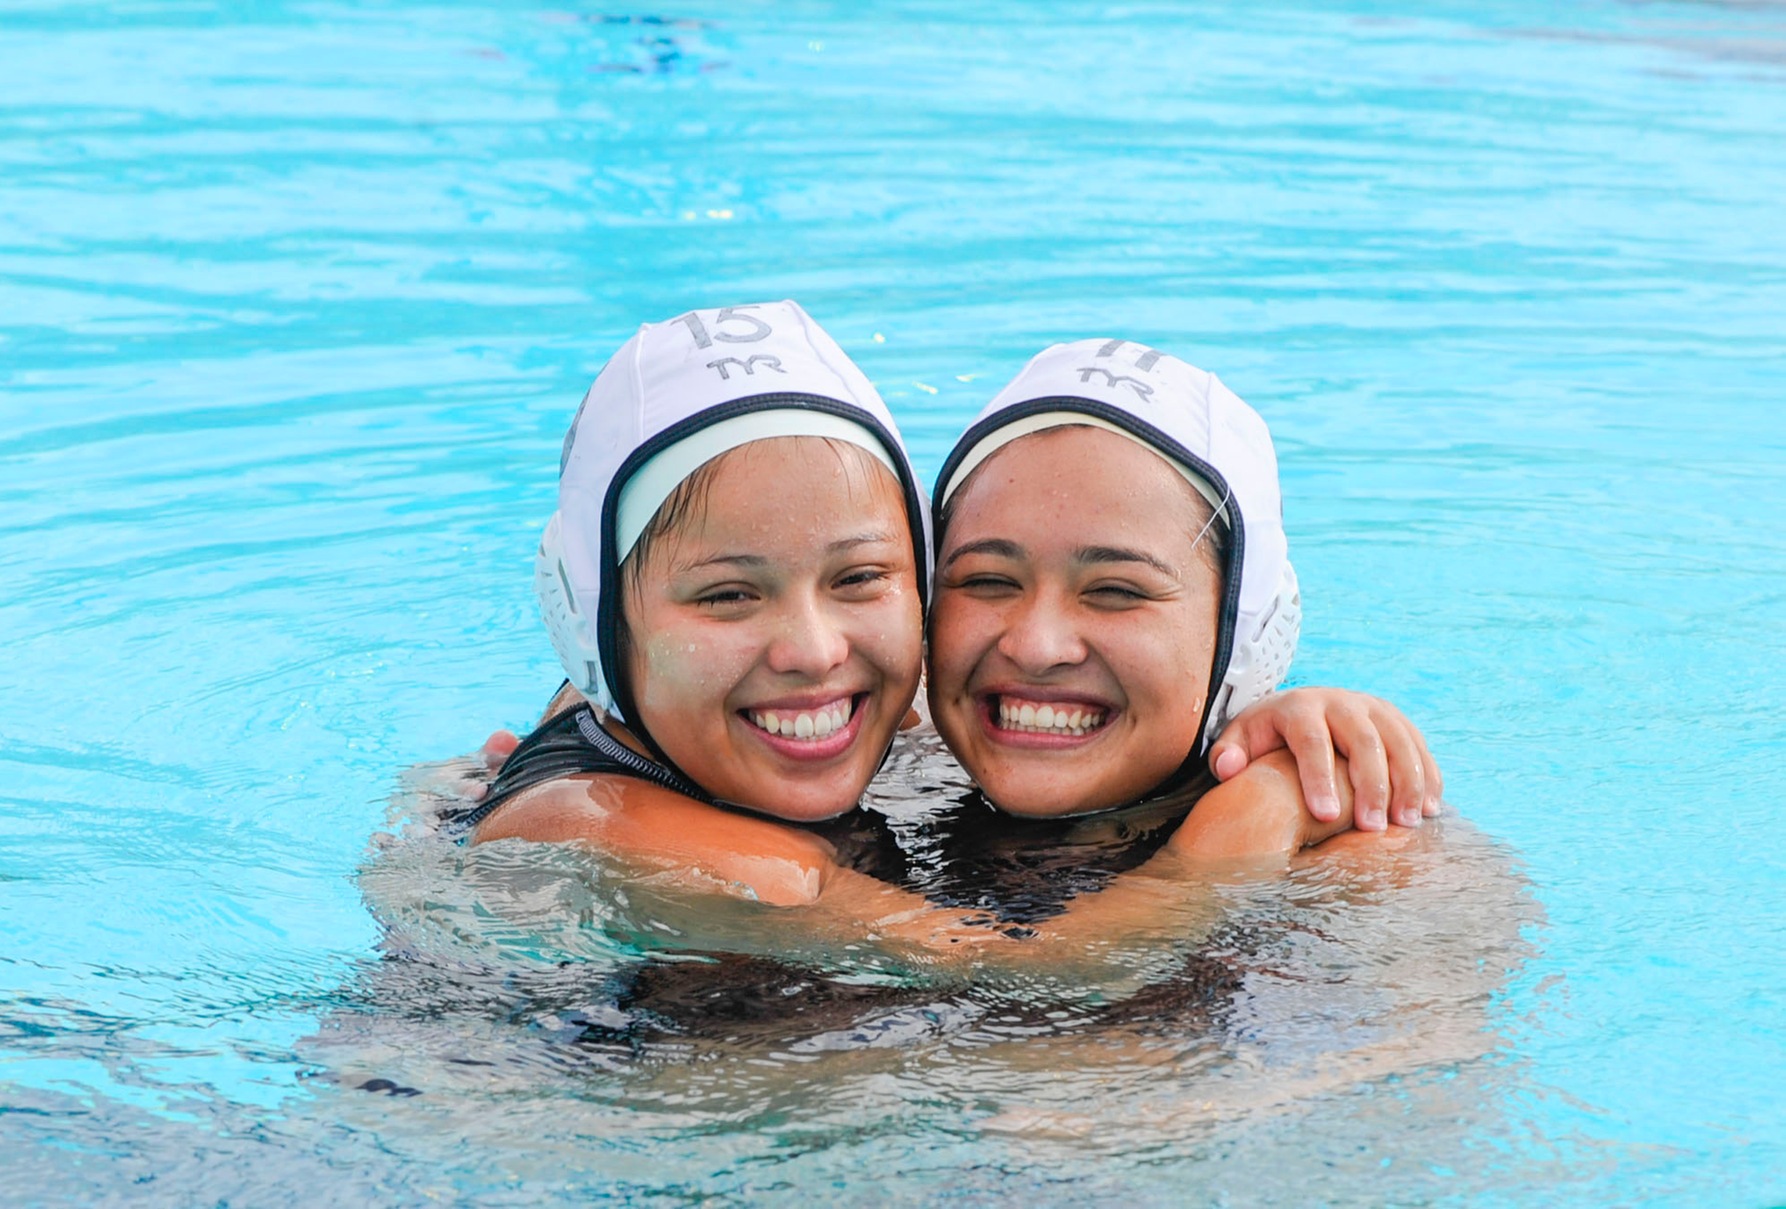 Allyson Jimenez (right) scored 7 goals in a 12-11 East Los Angeles College water polo win vs. Chaffey College. She scored 40 goals in October while Amy Cervantes scored 33. (Photo by Tadzio Garcia)